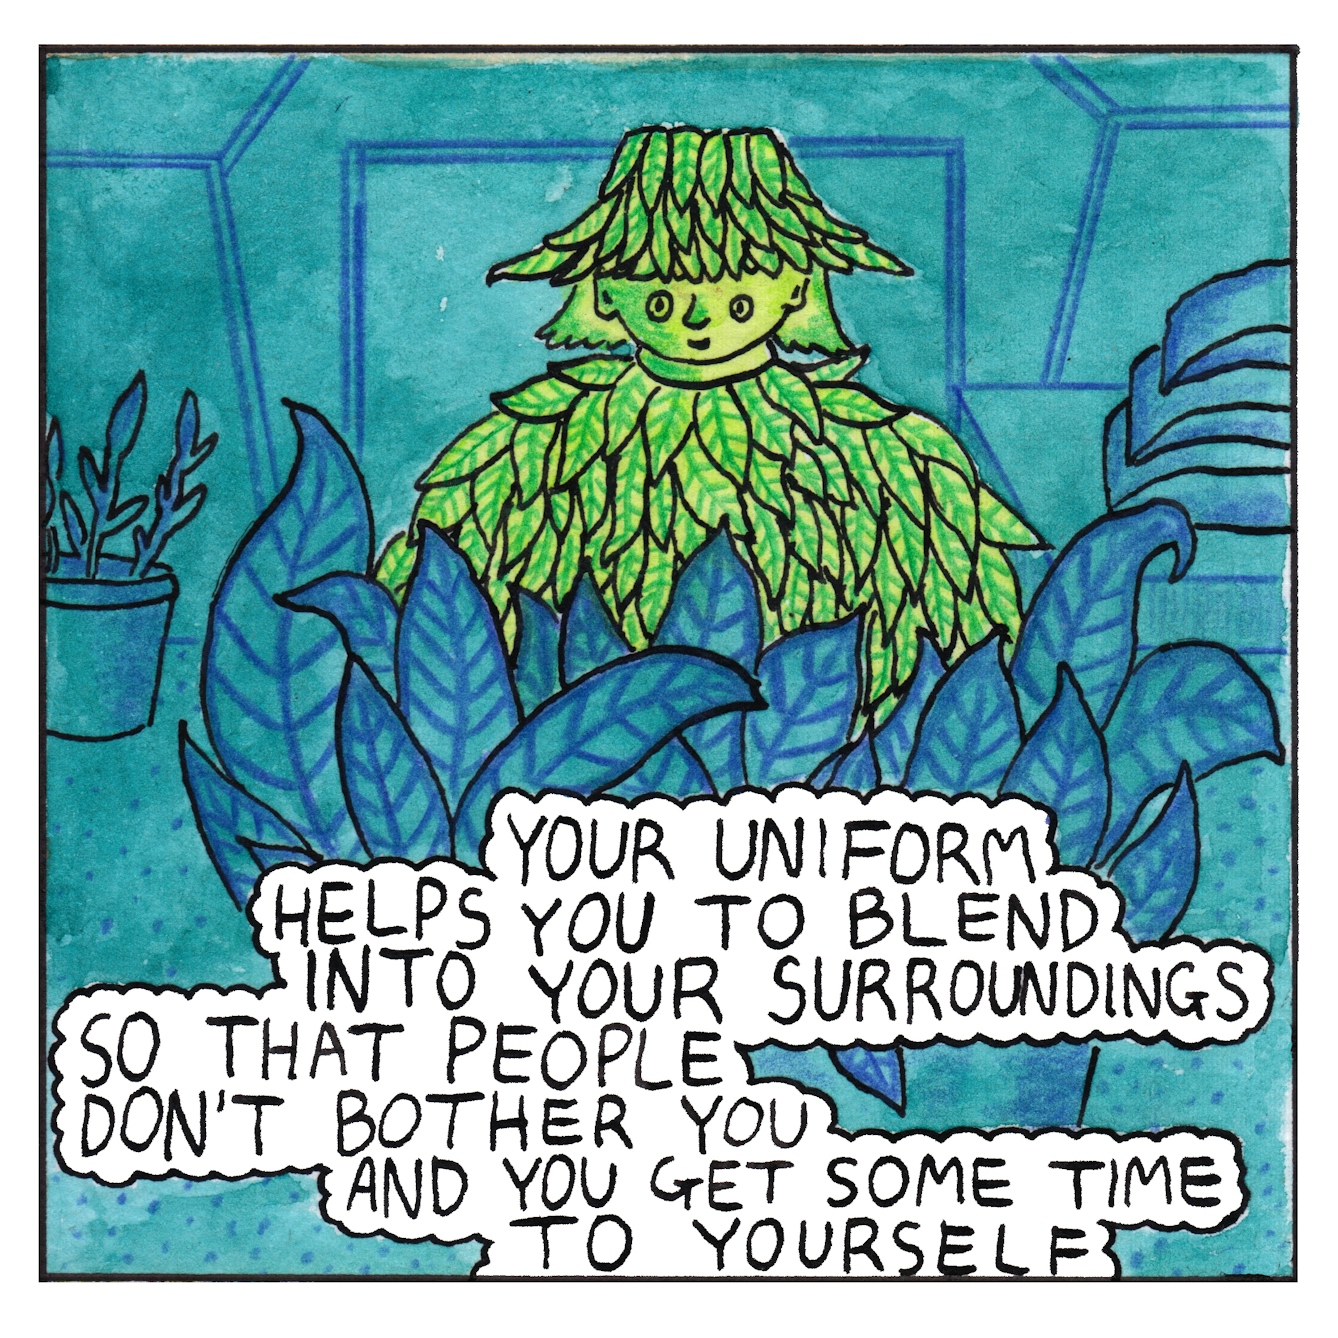 Panel 4 of a six-panel comic drawn with ink, watercolour and colour pencils: A smiling green character in a kaftan and bucket hat made of green leaves stands behind a large potted plant in a garden centre. A textbubble in front of the plant reads "Your uniform helps you to blend into your surroundings so that people don't bother you and you get some time to yourself"